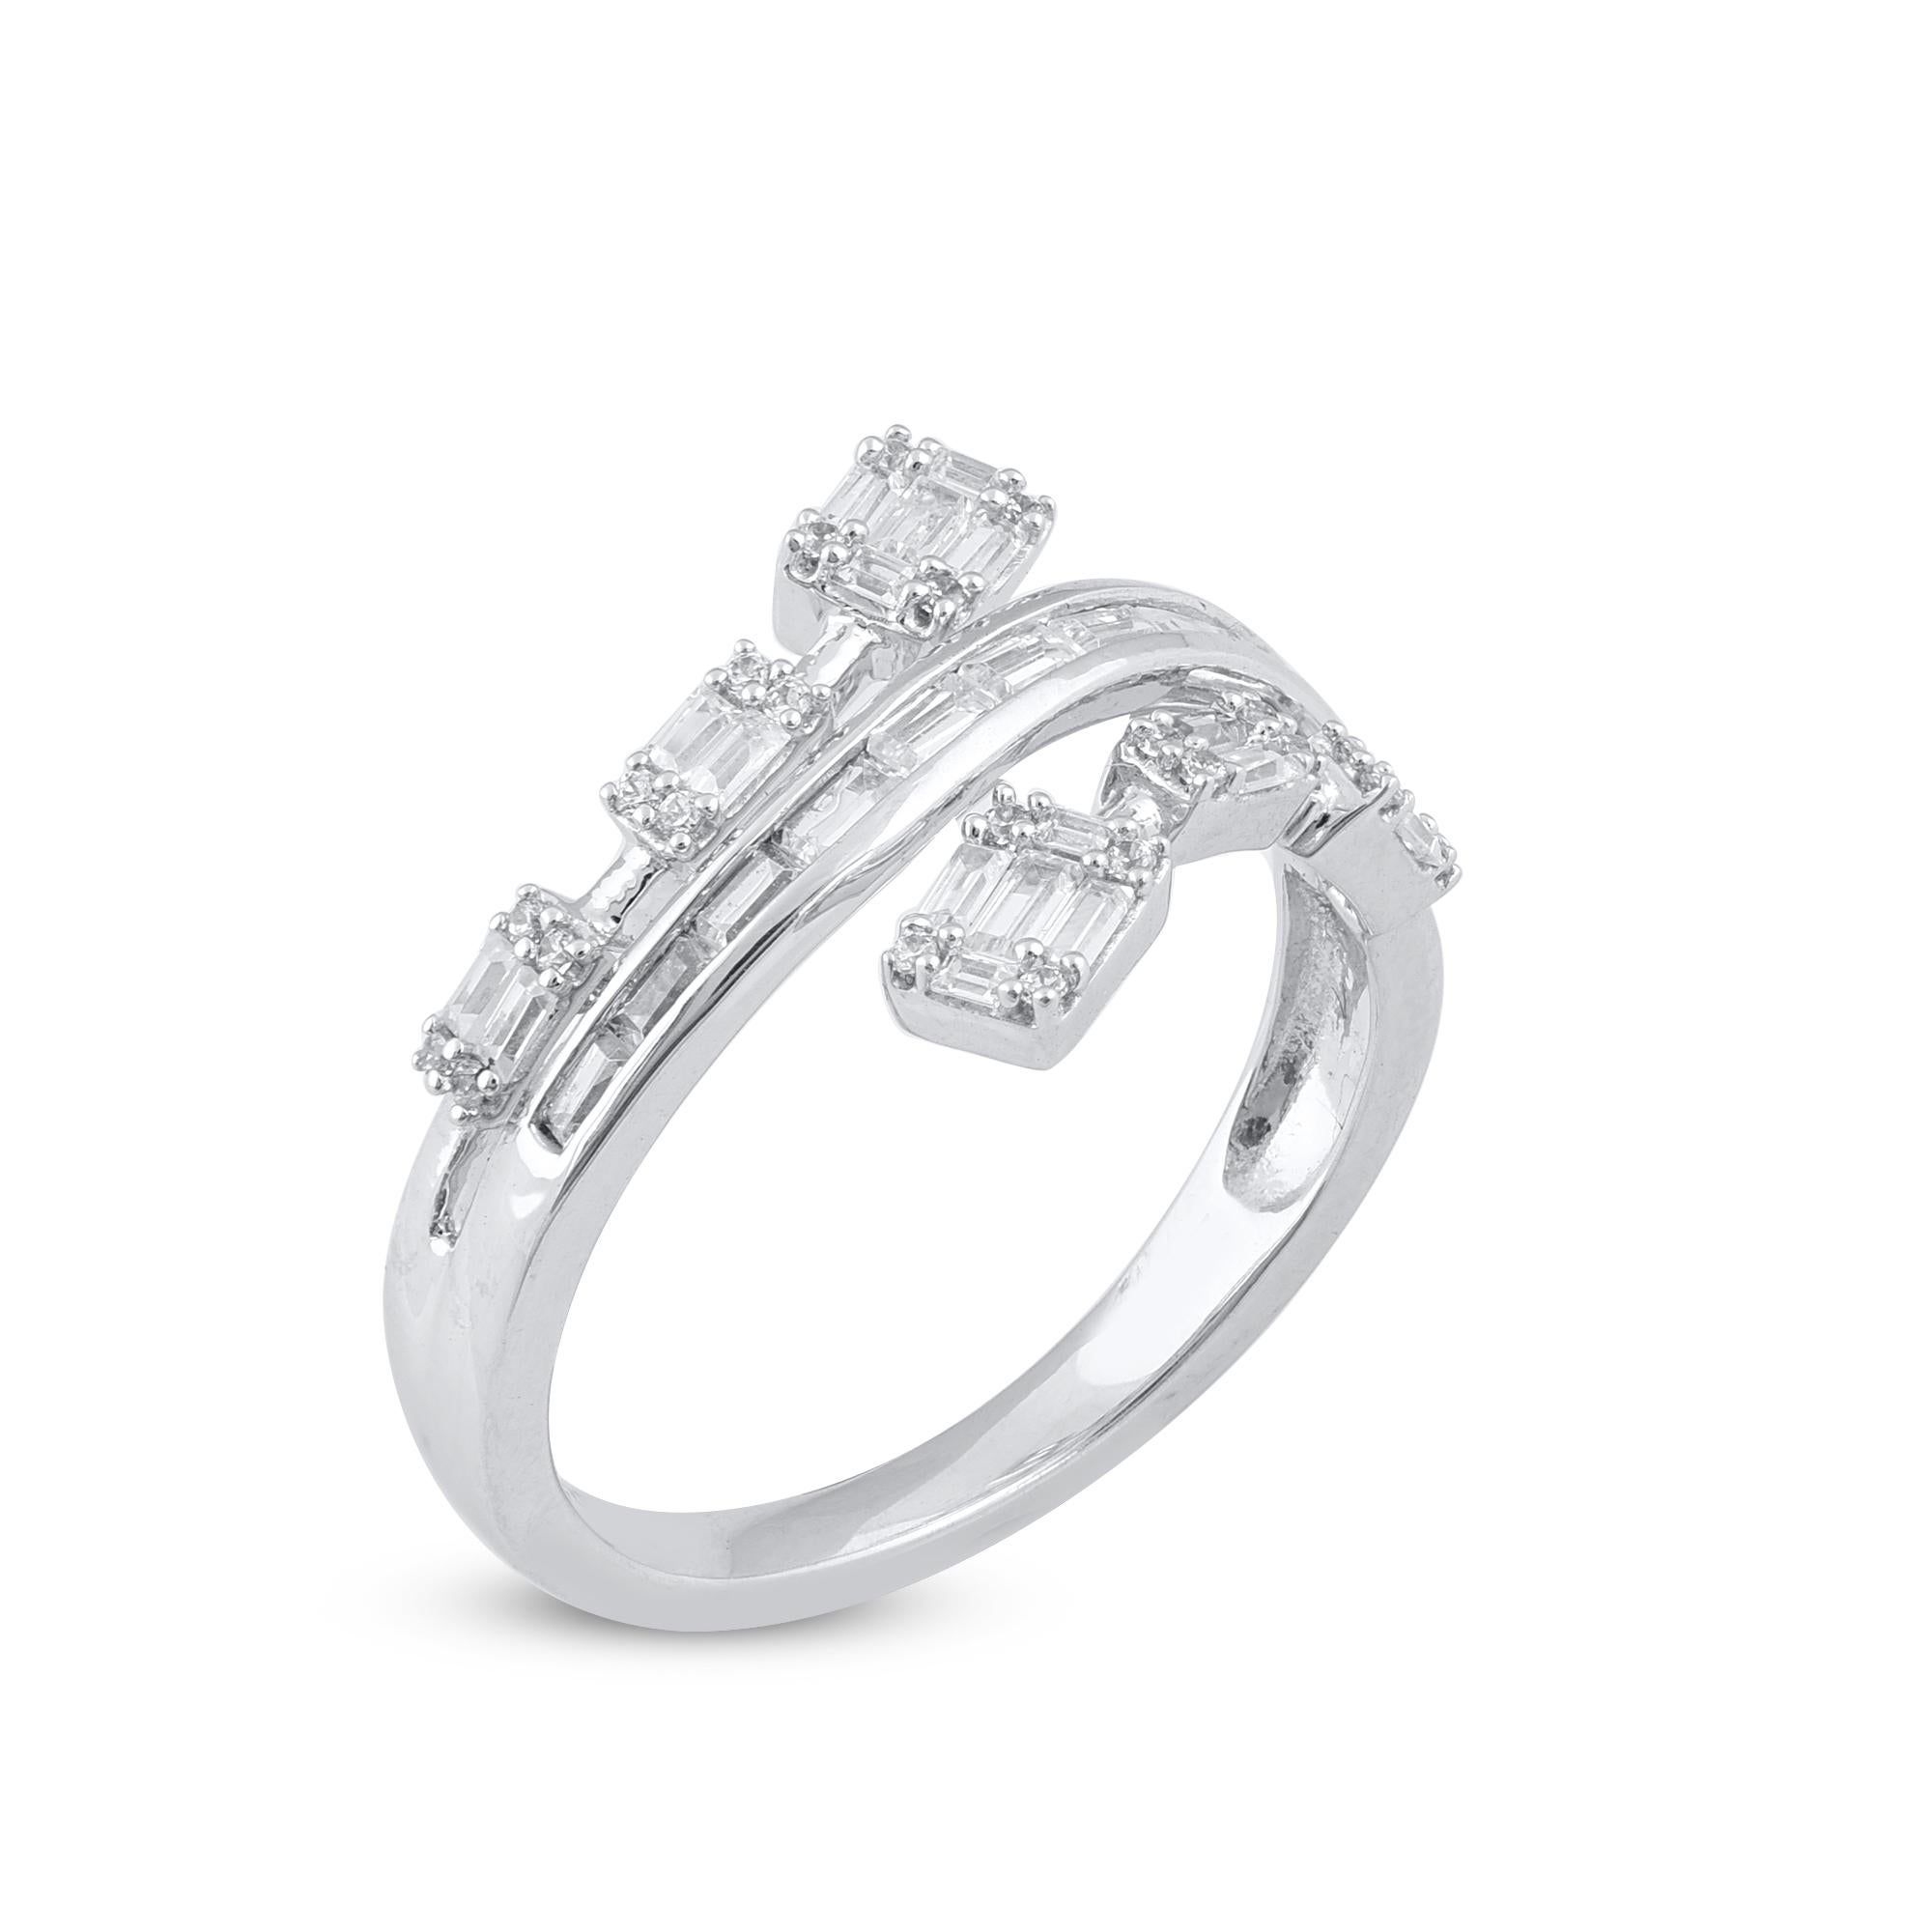 Truly exquisite, she'll admire the effortless look of this graceful diamond crossover ring. The ring is crafted from 14-karat gold in your choice of white, rose, or yellow, and features Round Brilliant 24 and Baguette - 29 white diamonds, Prong &